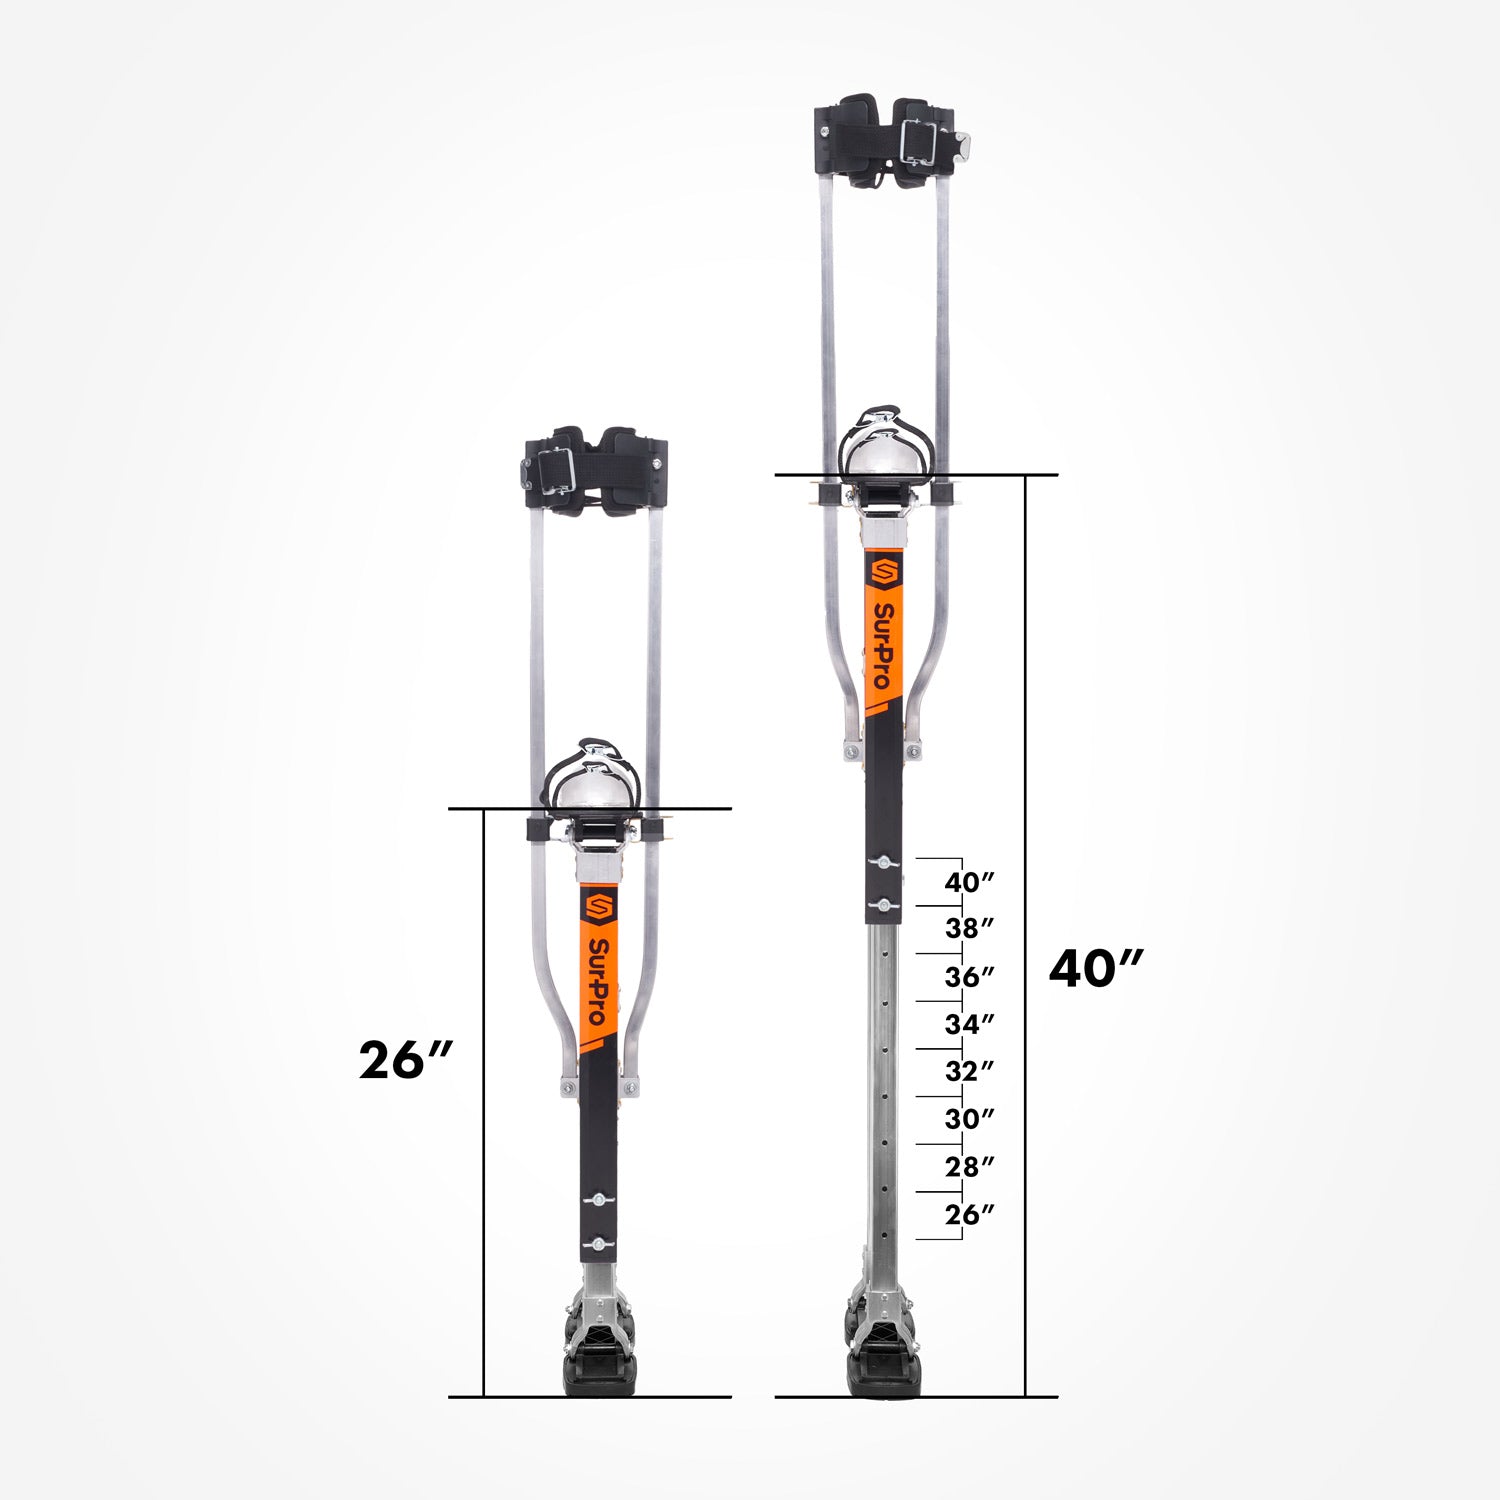 SurPro S2 Drywall Stilts - Best balance and stability